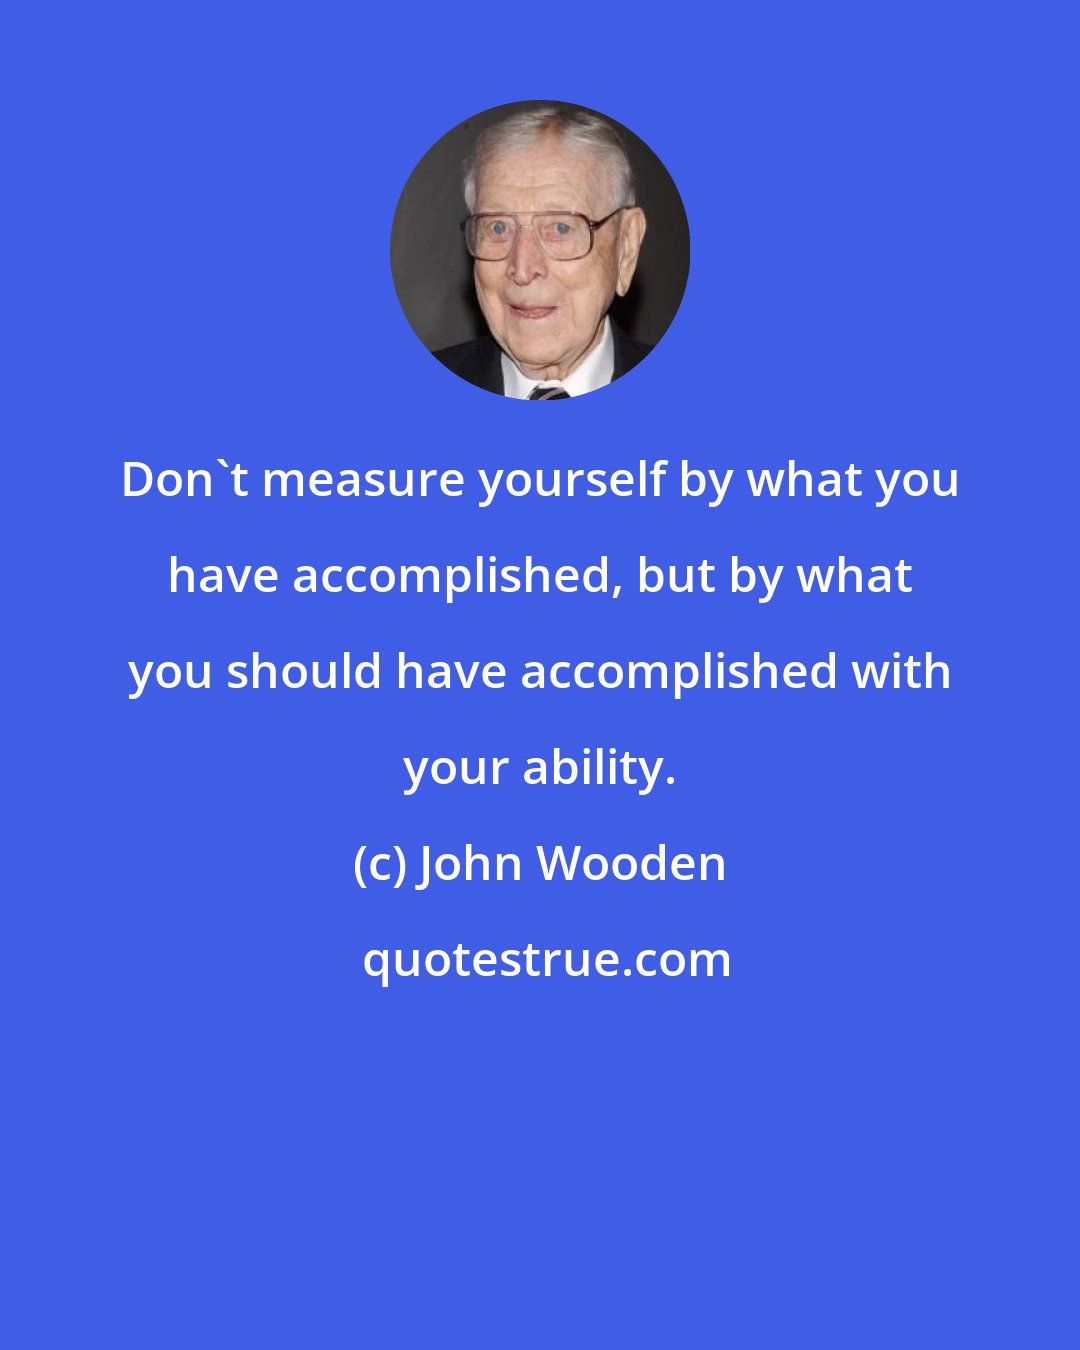 John Wooden: Don't measure yourself by what you have accomplished, but by what you should have accomplished with your ability.